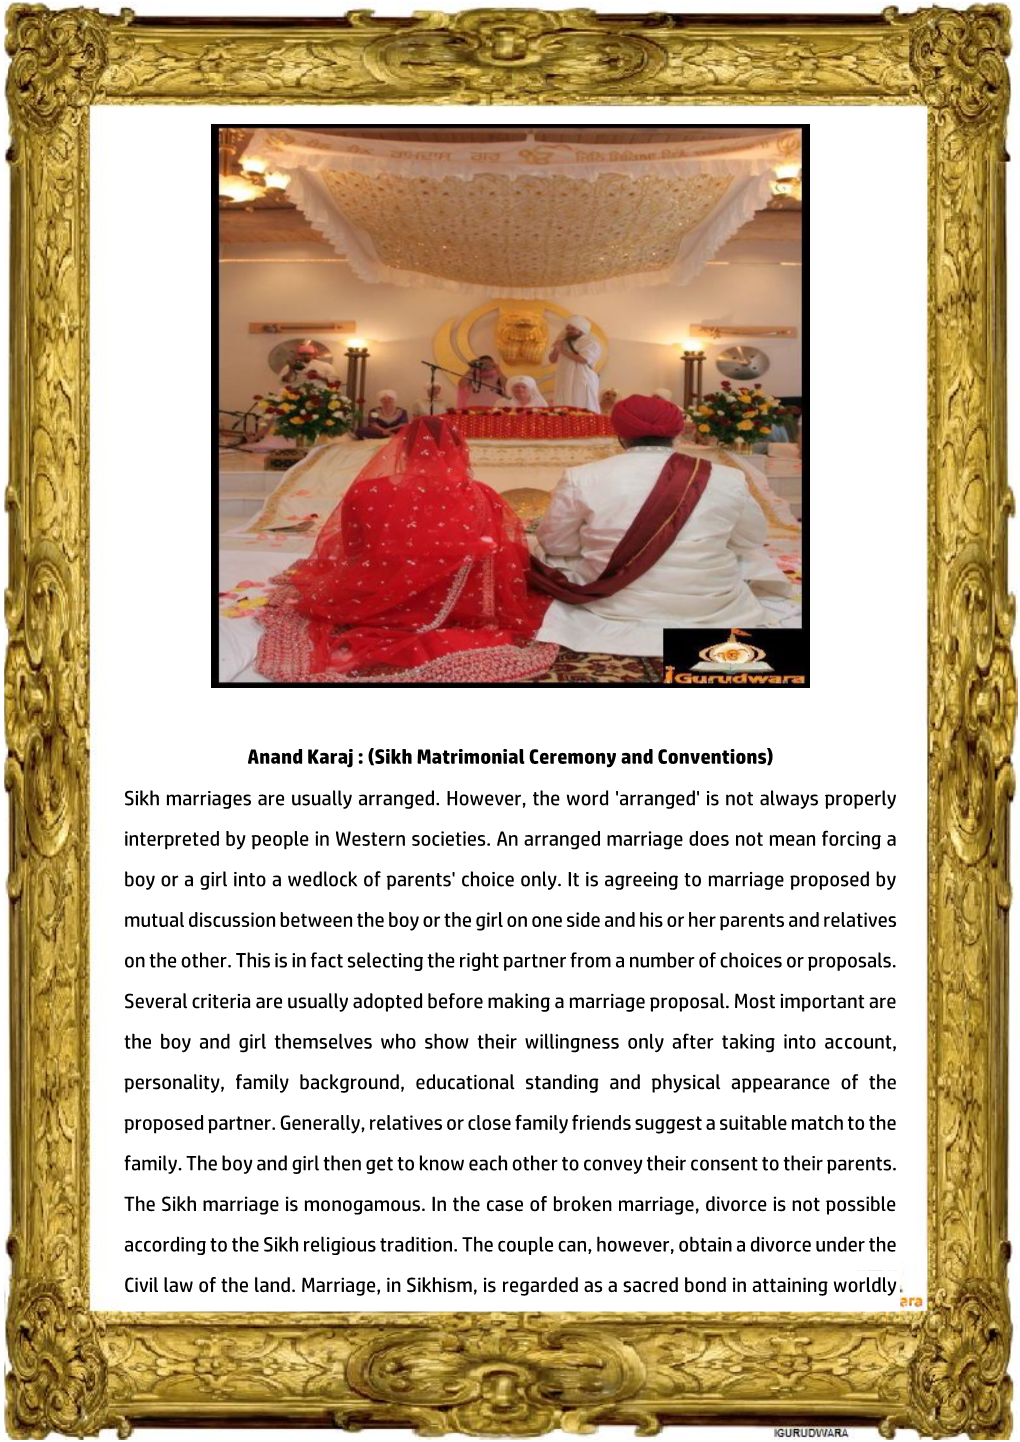 Anand Karaj : (Sikh Matrimonial Ceremony and Conventions) Sikh